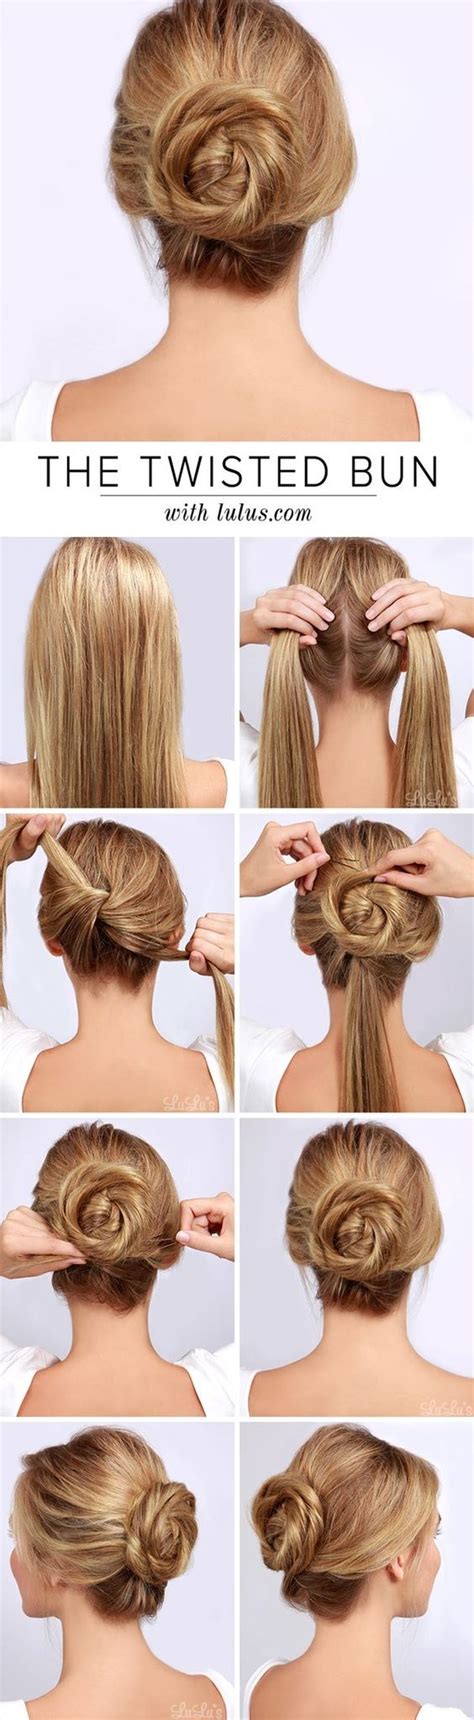 #easyhairstyle #easyhairstyles #beautifulhairstyle 7 easy everyday hairstyles with pigtails and elastics (easy little girl. 12 Easy Hairstyles For Any and All Lazy Girls - Pretty Designs